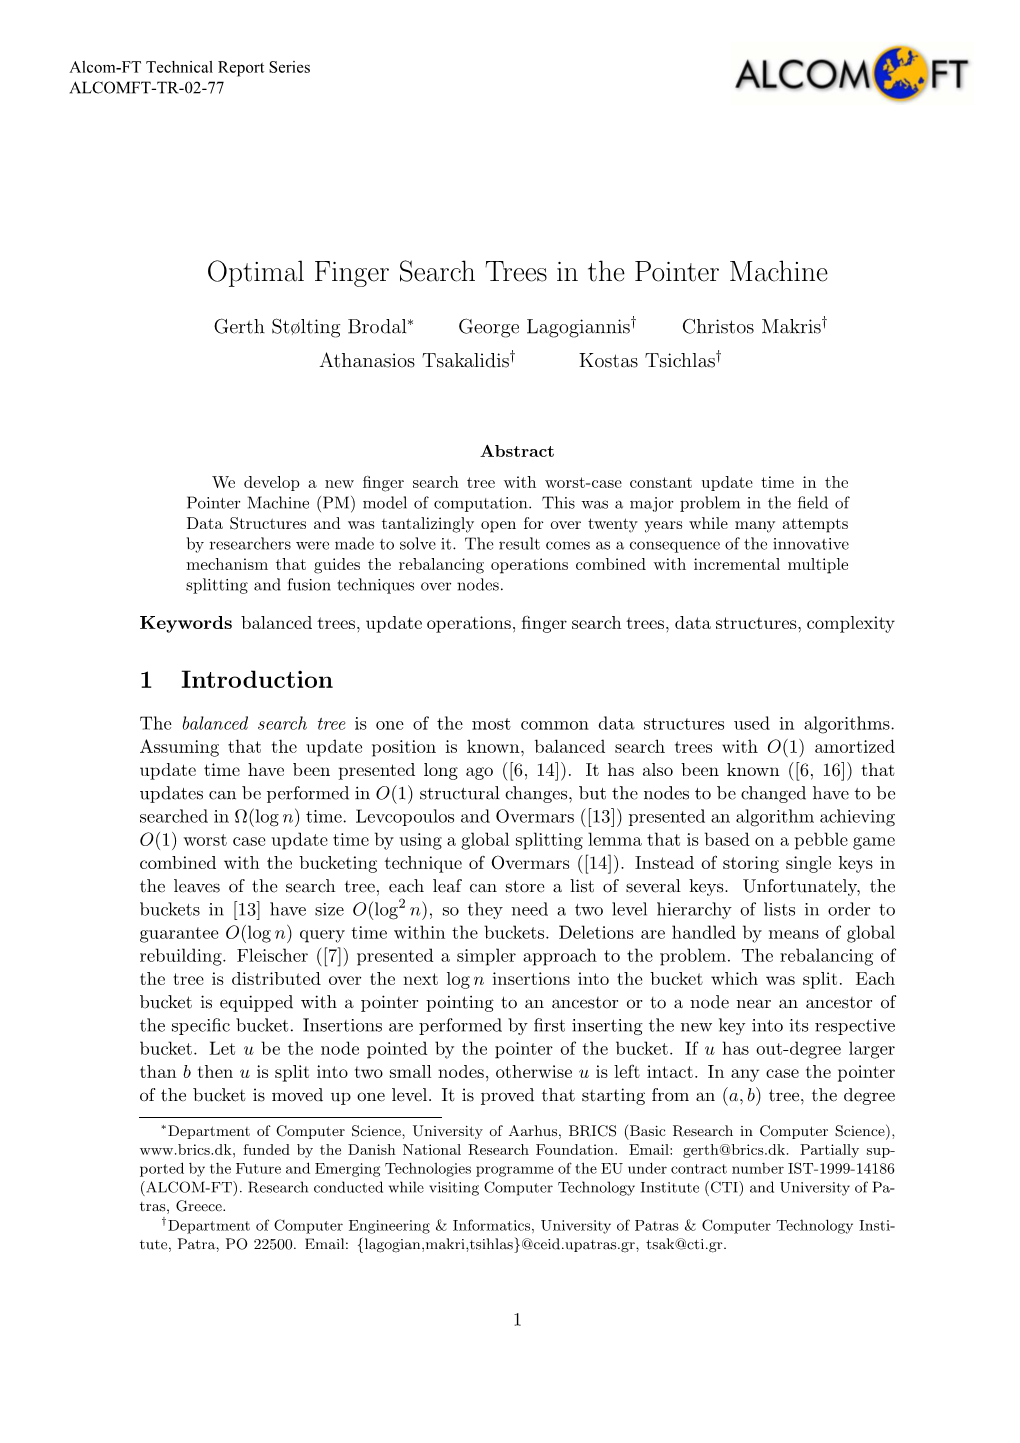 Optimal Finger Search Trees in the Pointer Machine